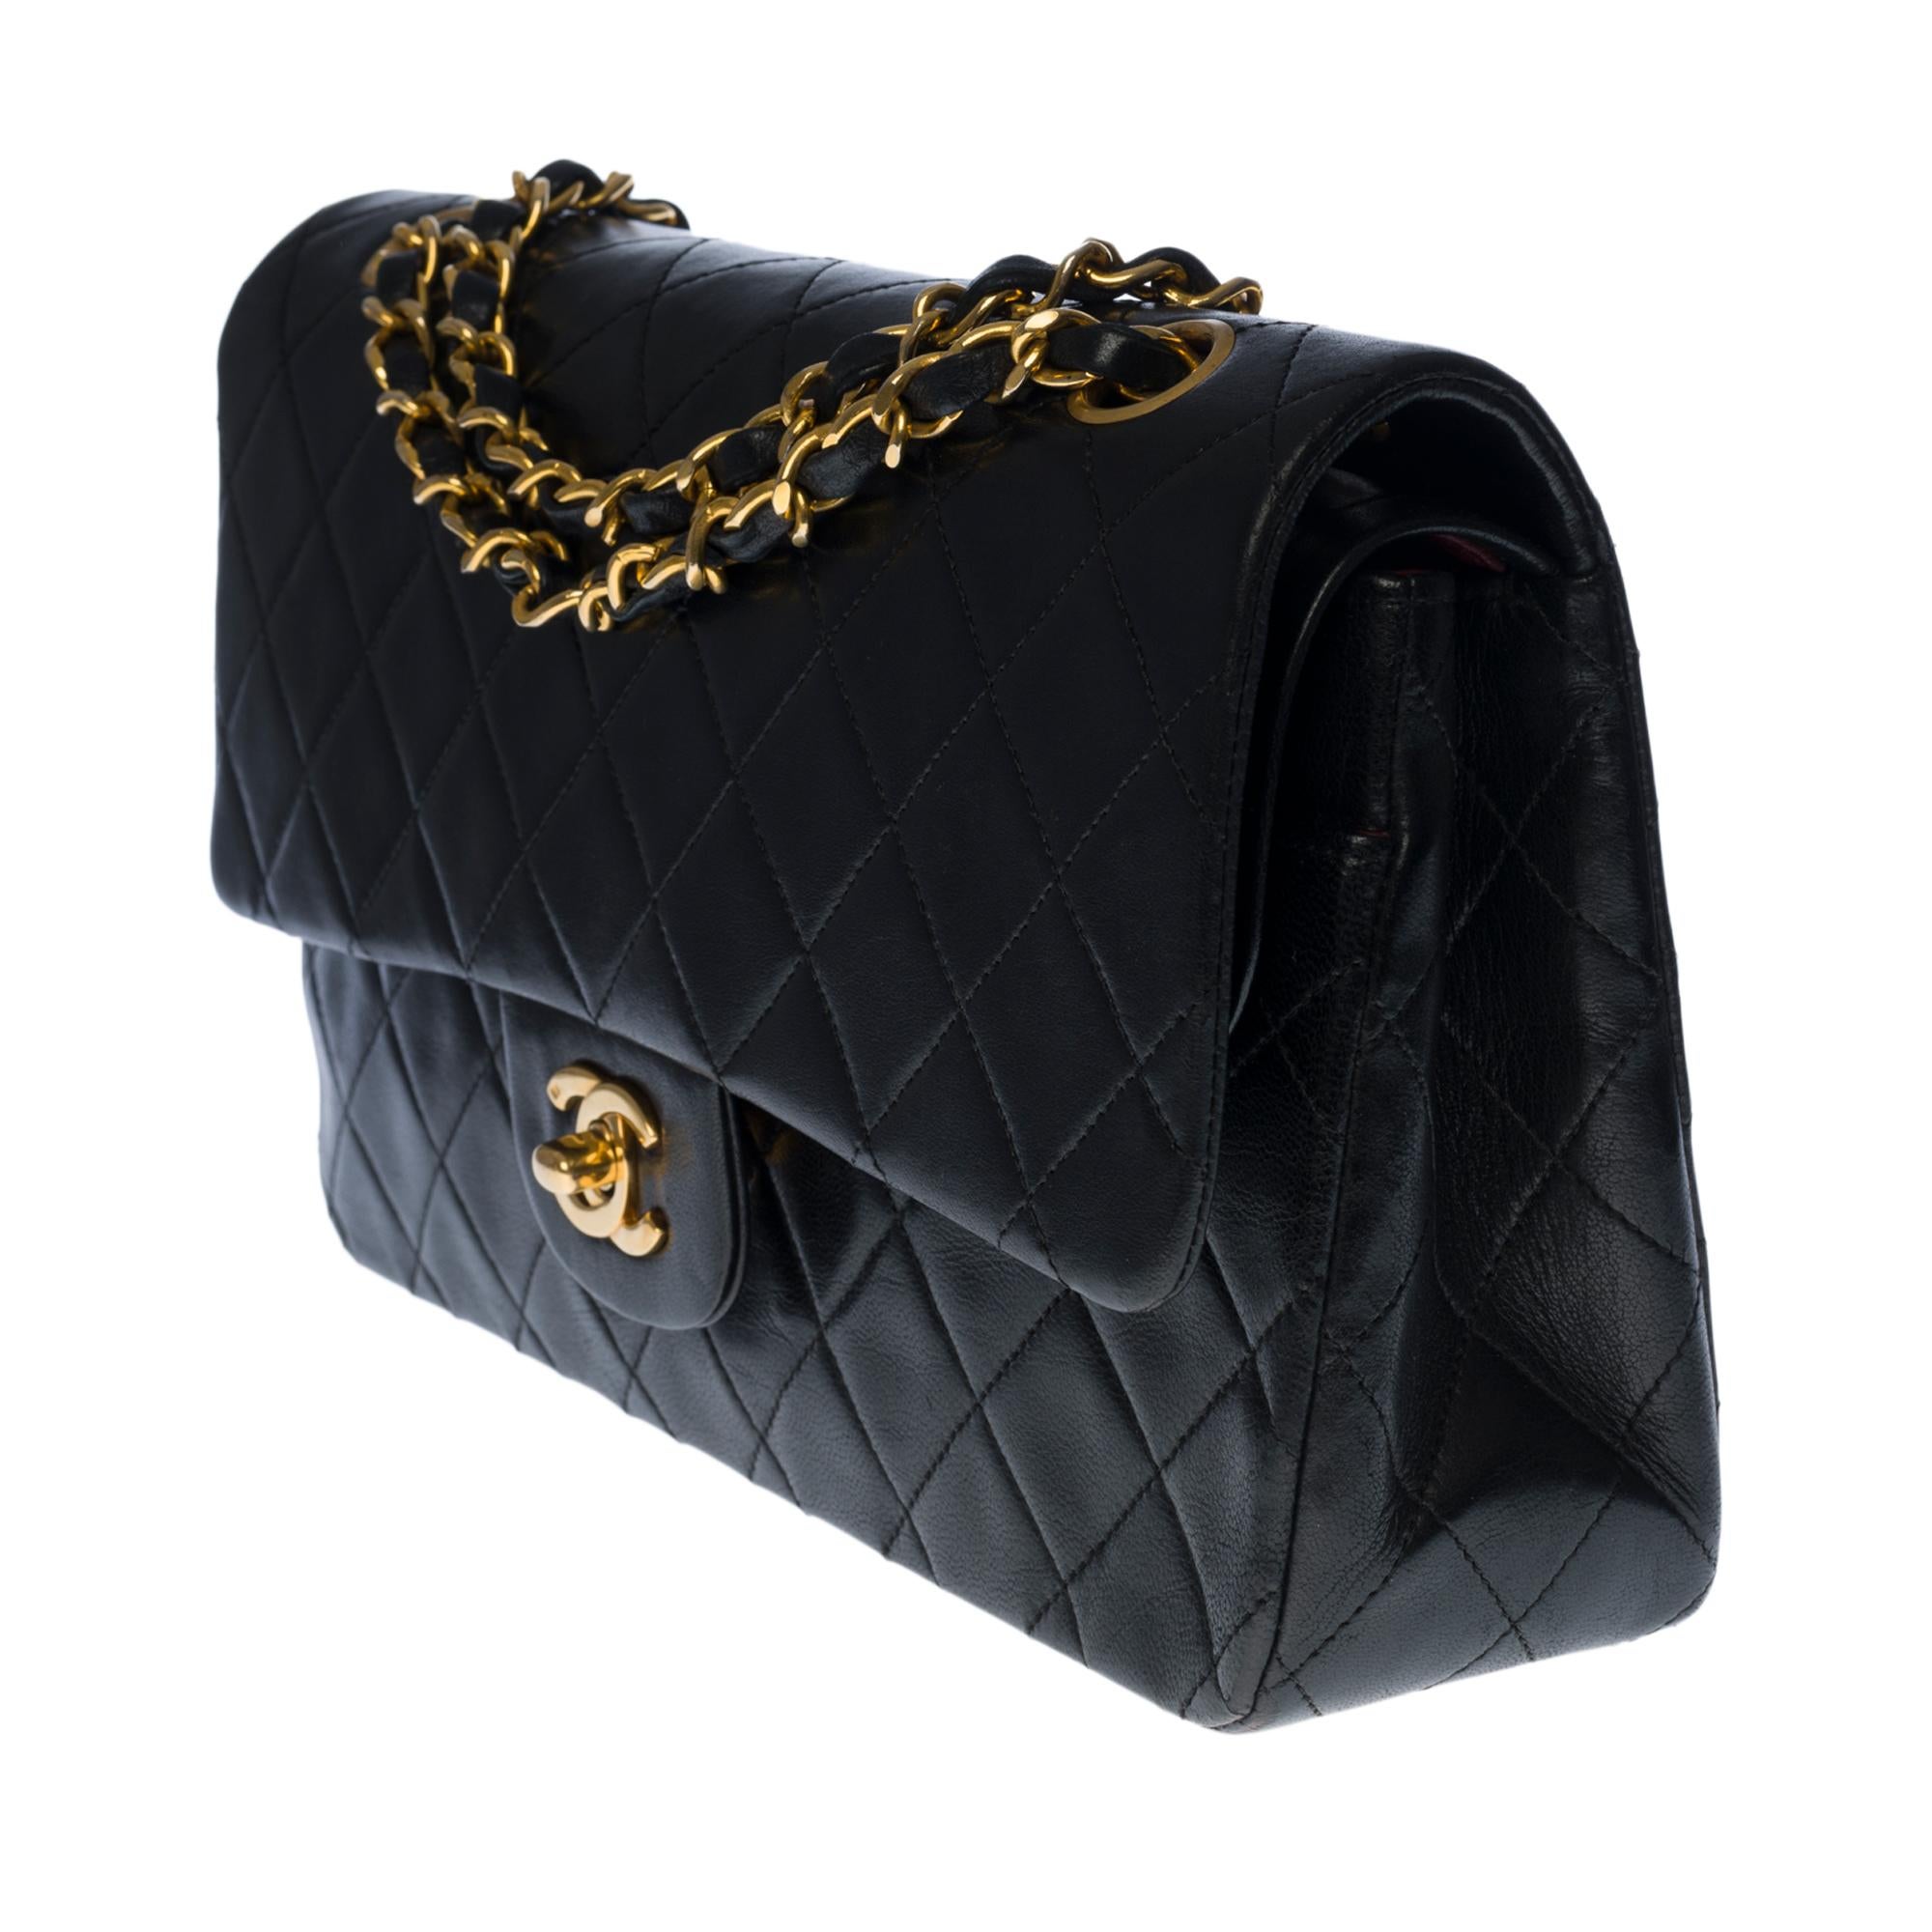 Black Chanel Timeless/Classic shoulder bag in black quilted lambskin and gold hardware